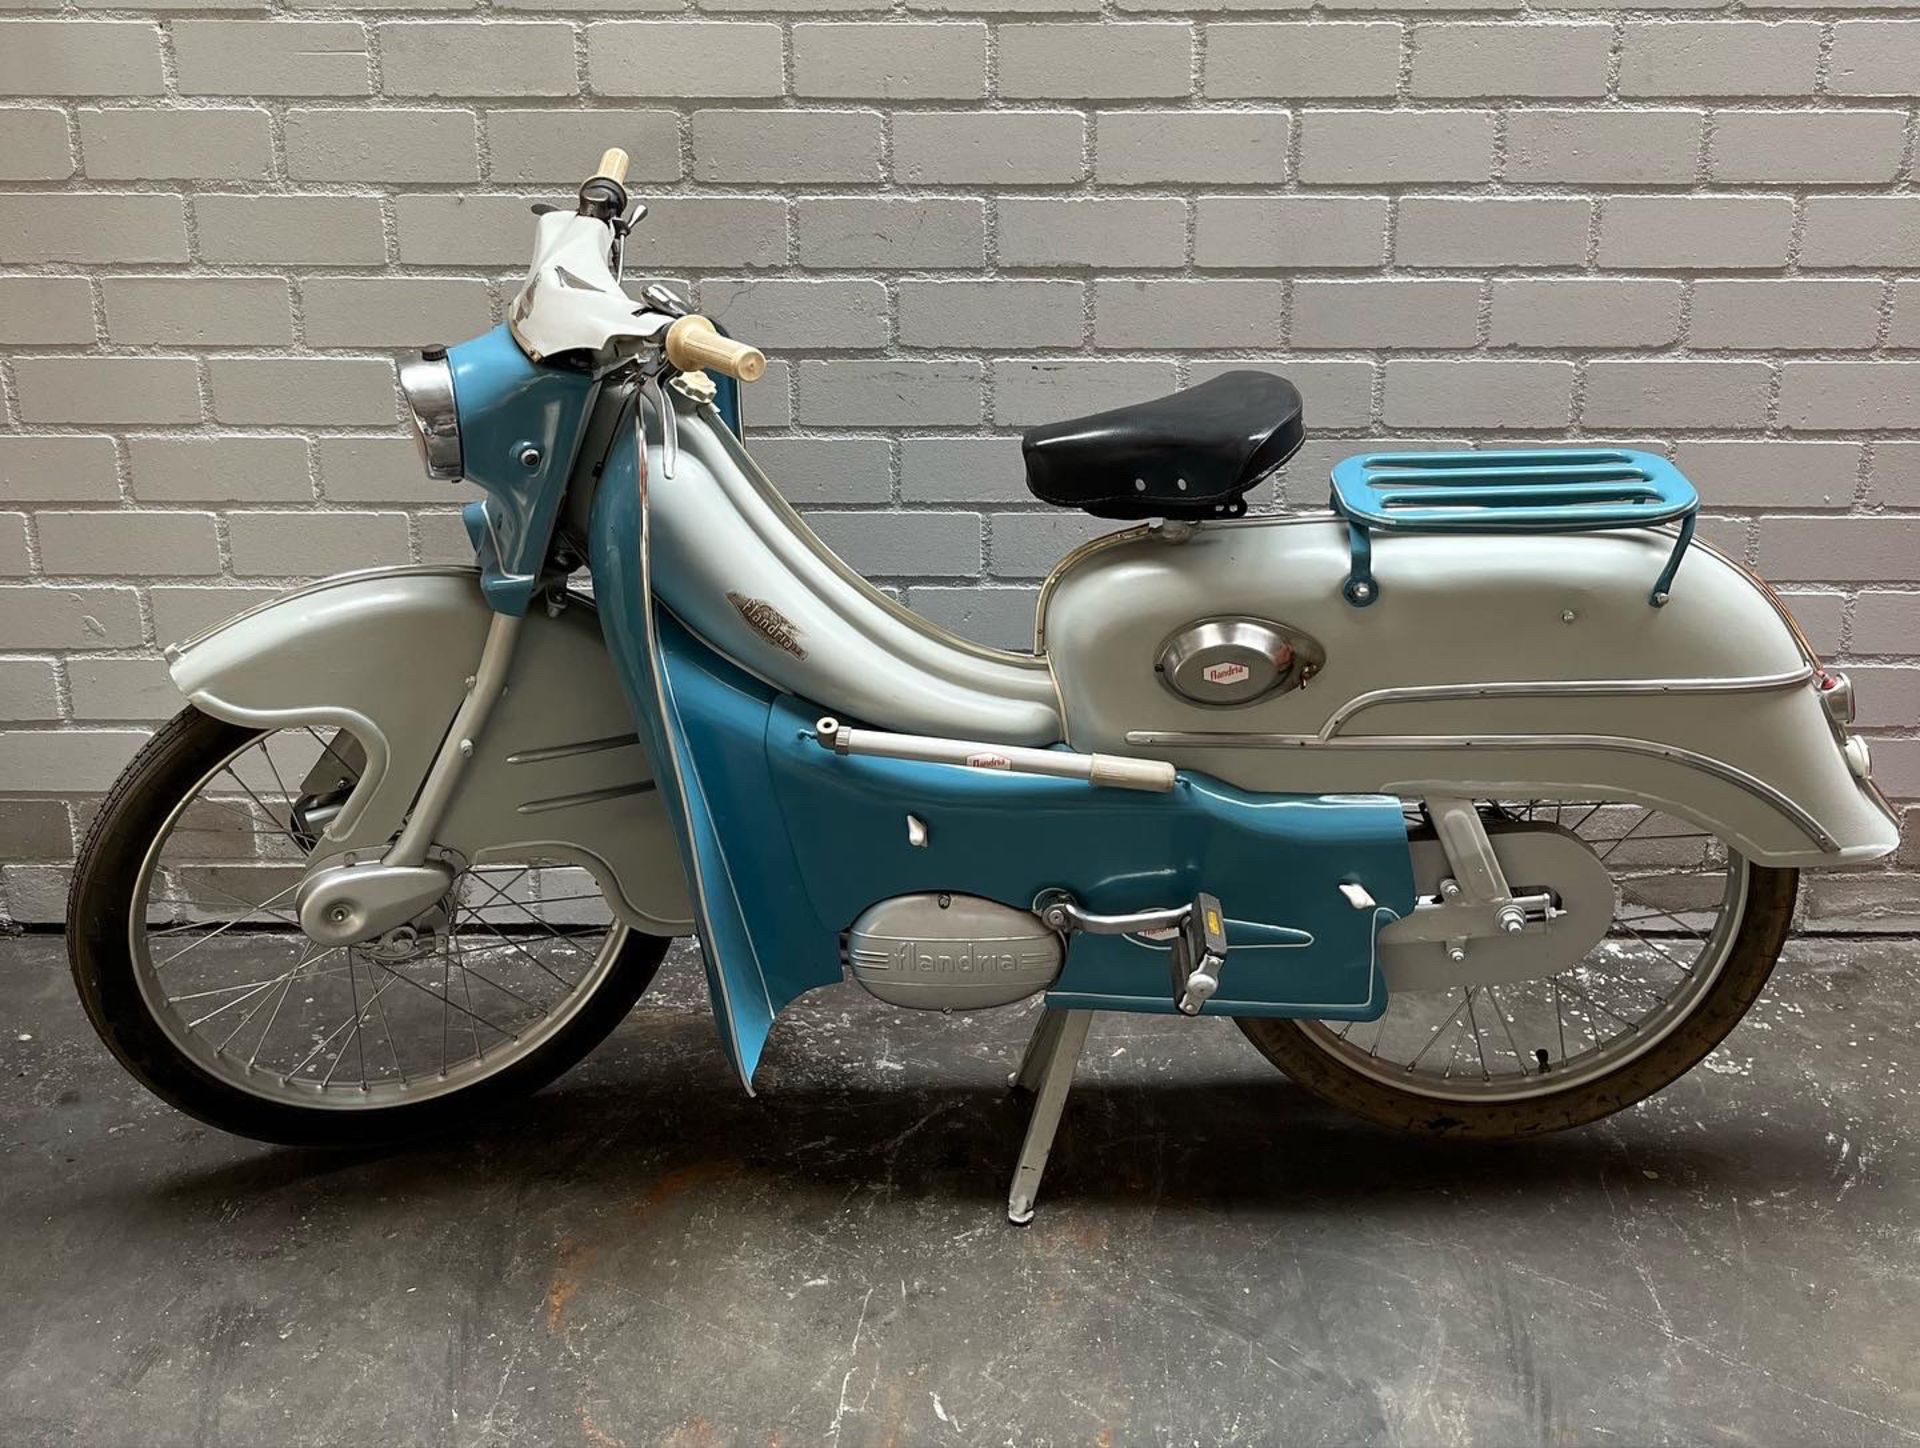 Vintage Flandria 49cc Moped ca. 1960s - Image 5 of 10